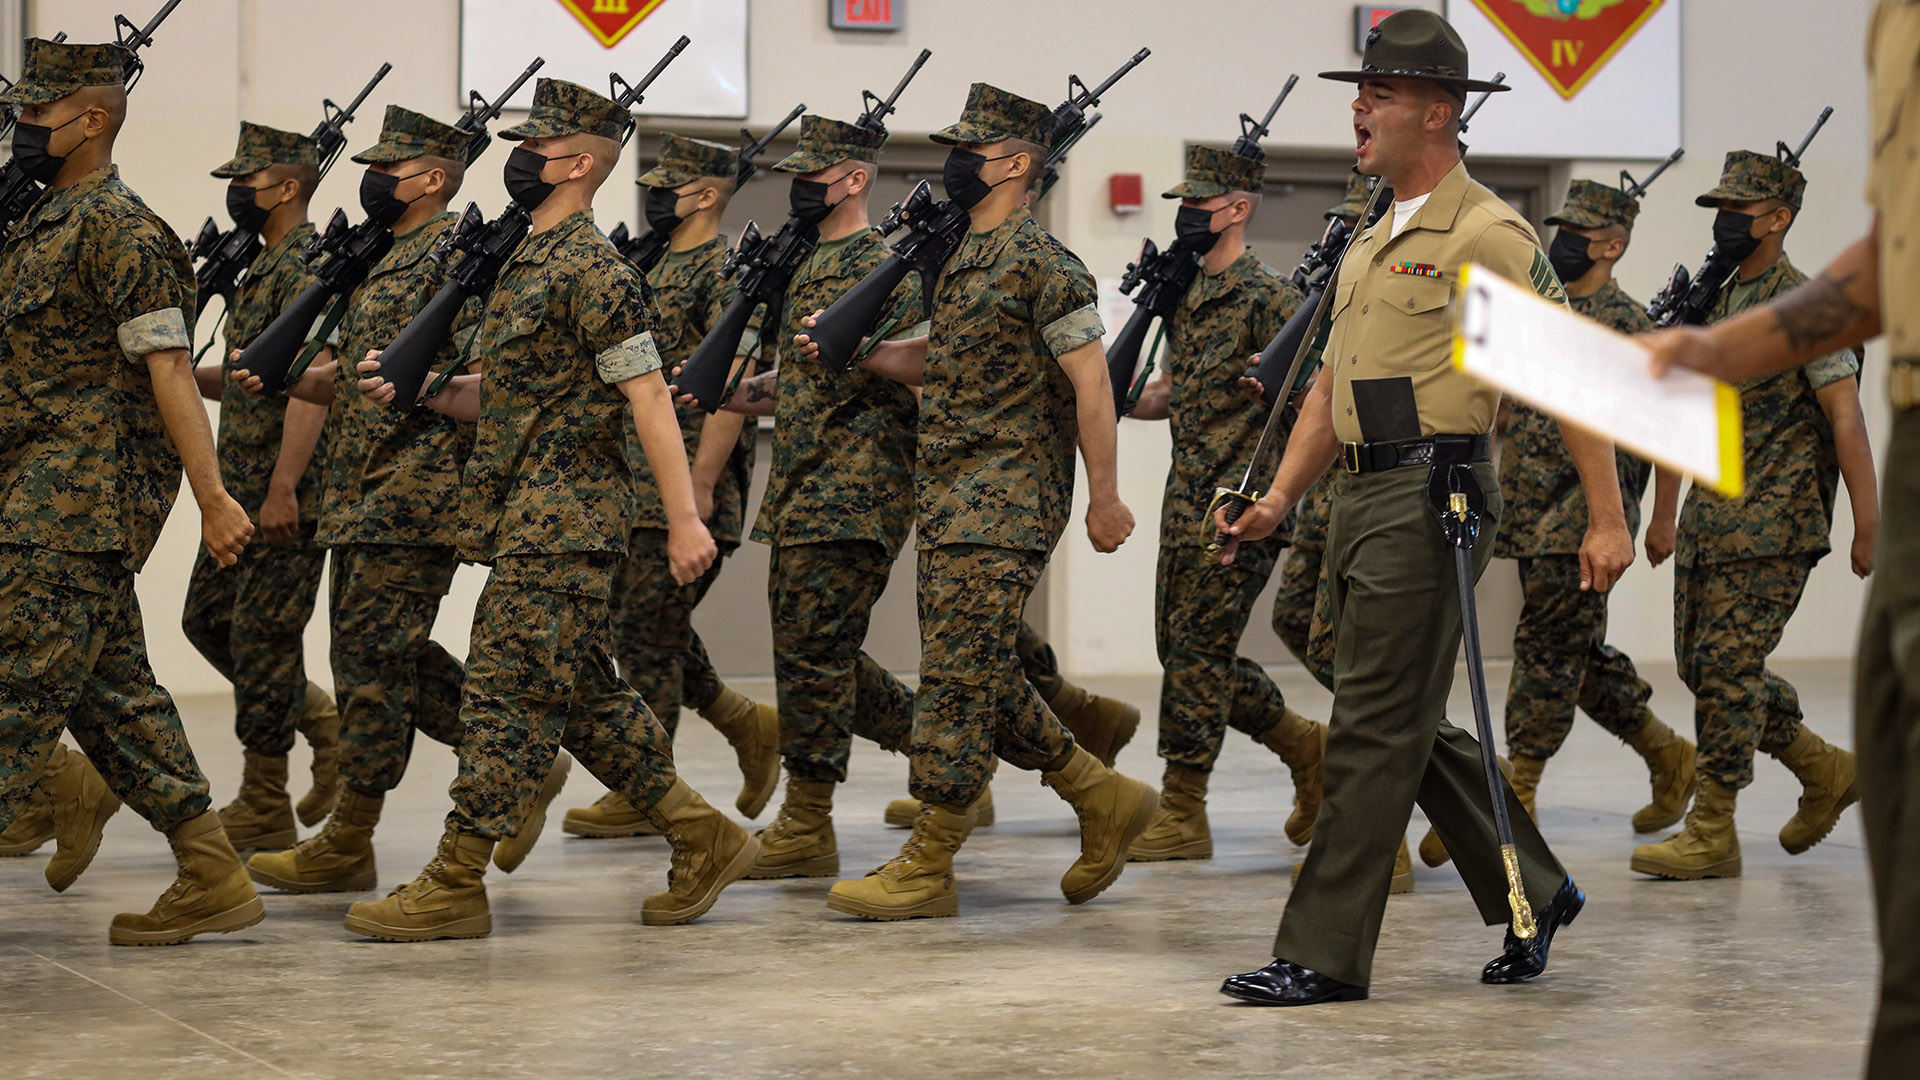 A Marine Corps recruit died on his first training day at boot camp